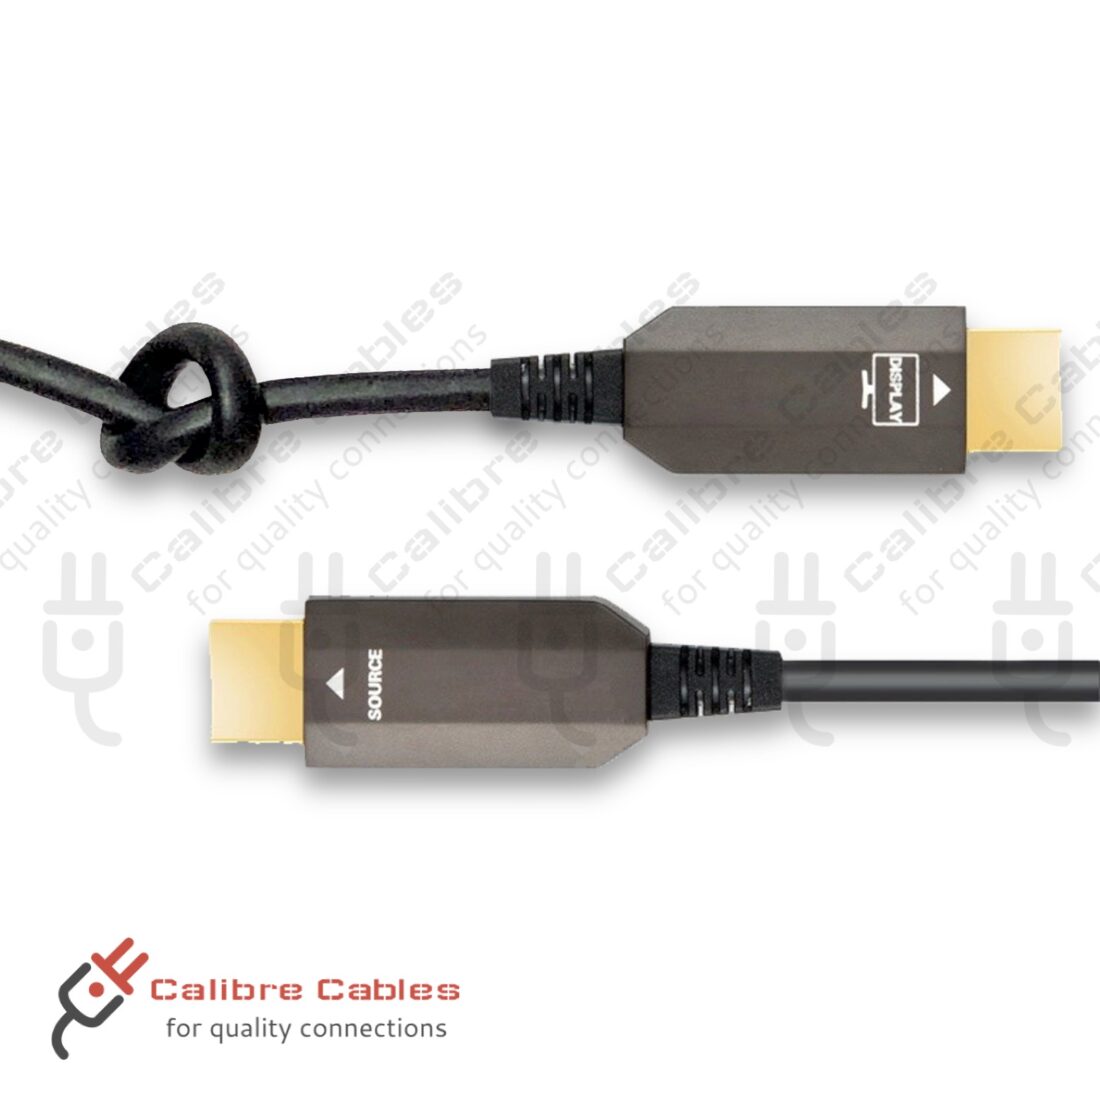 HDMI fibre optic cable knotted